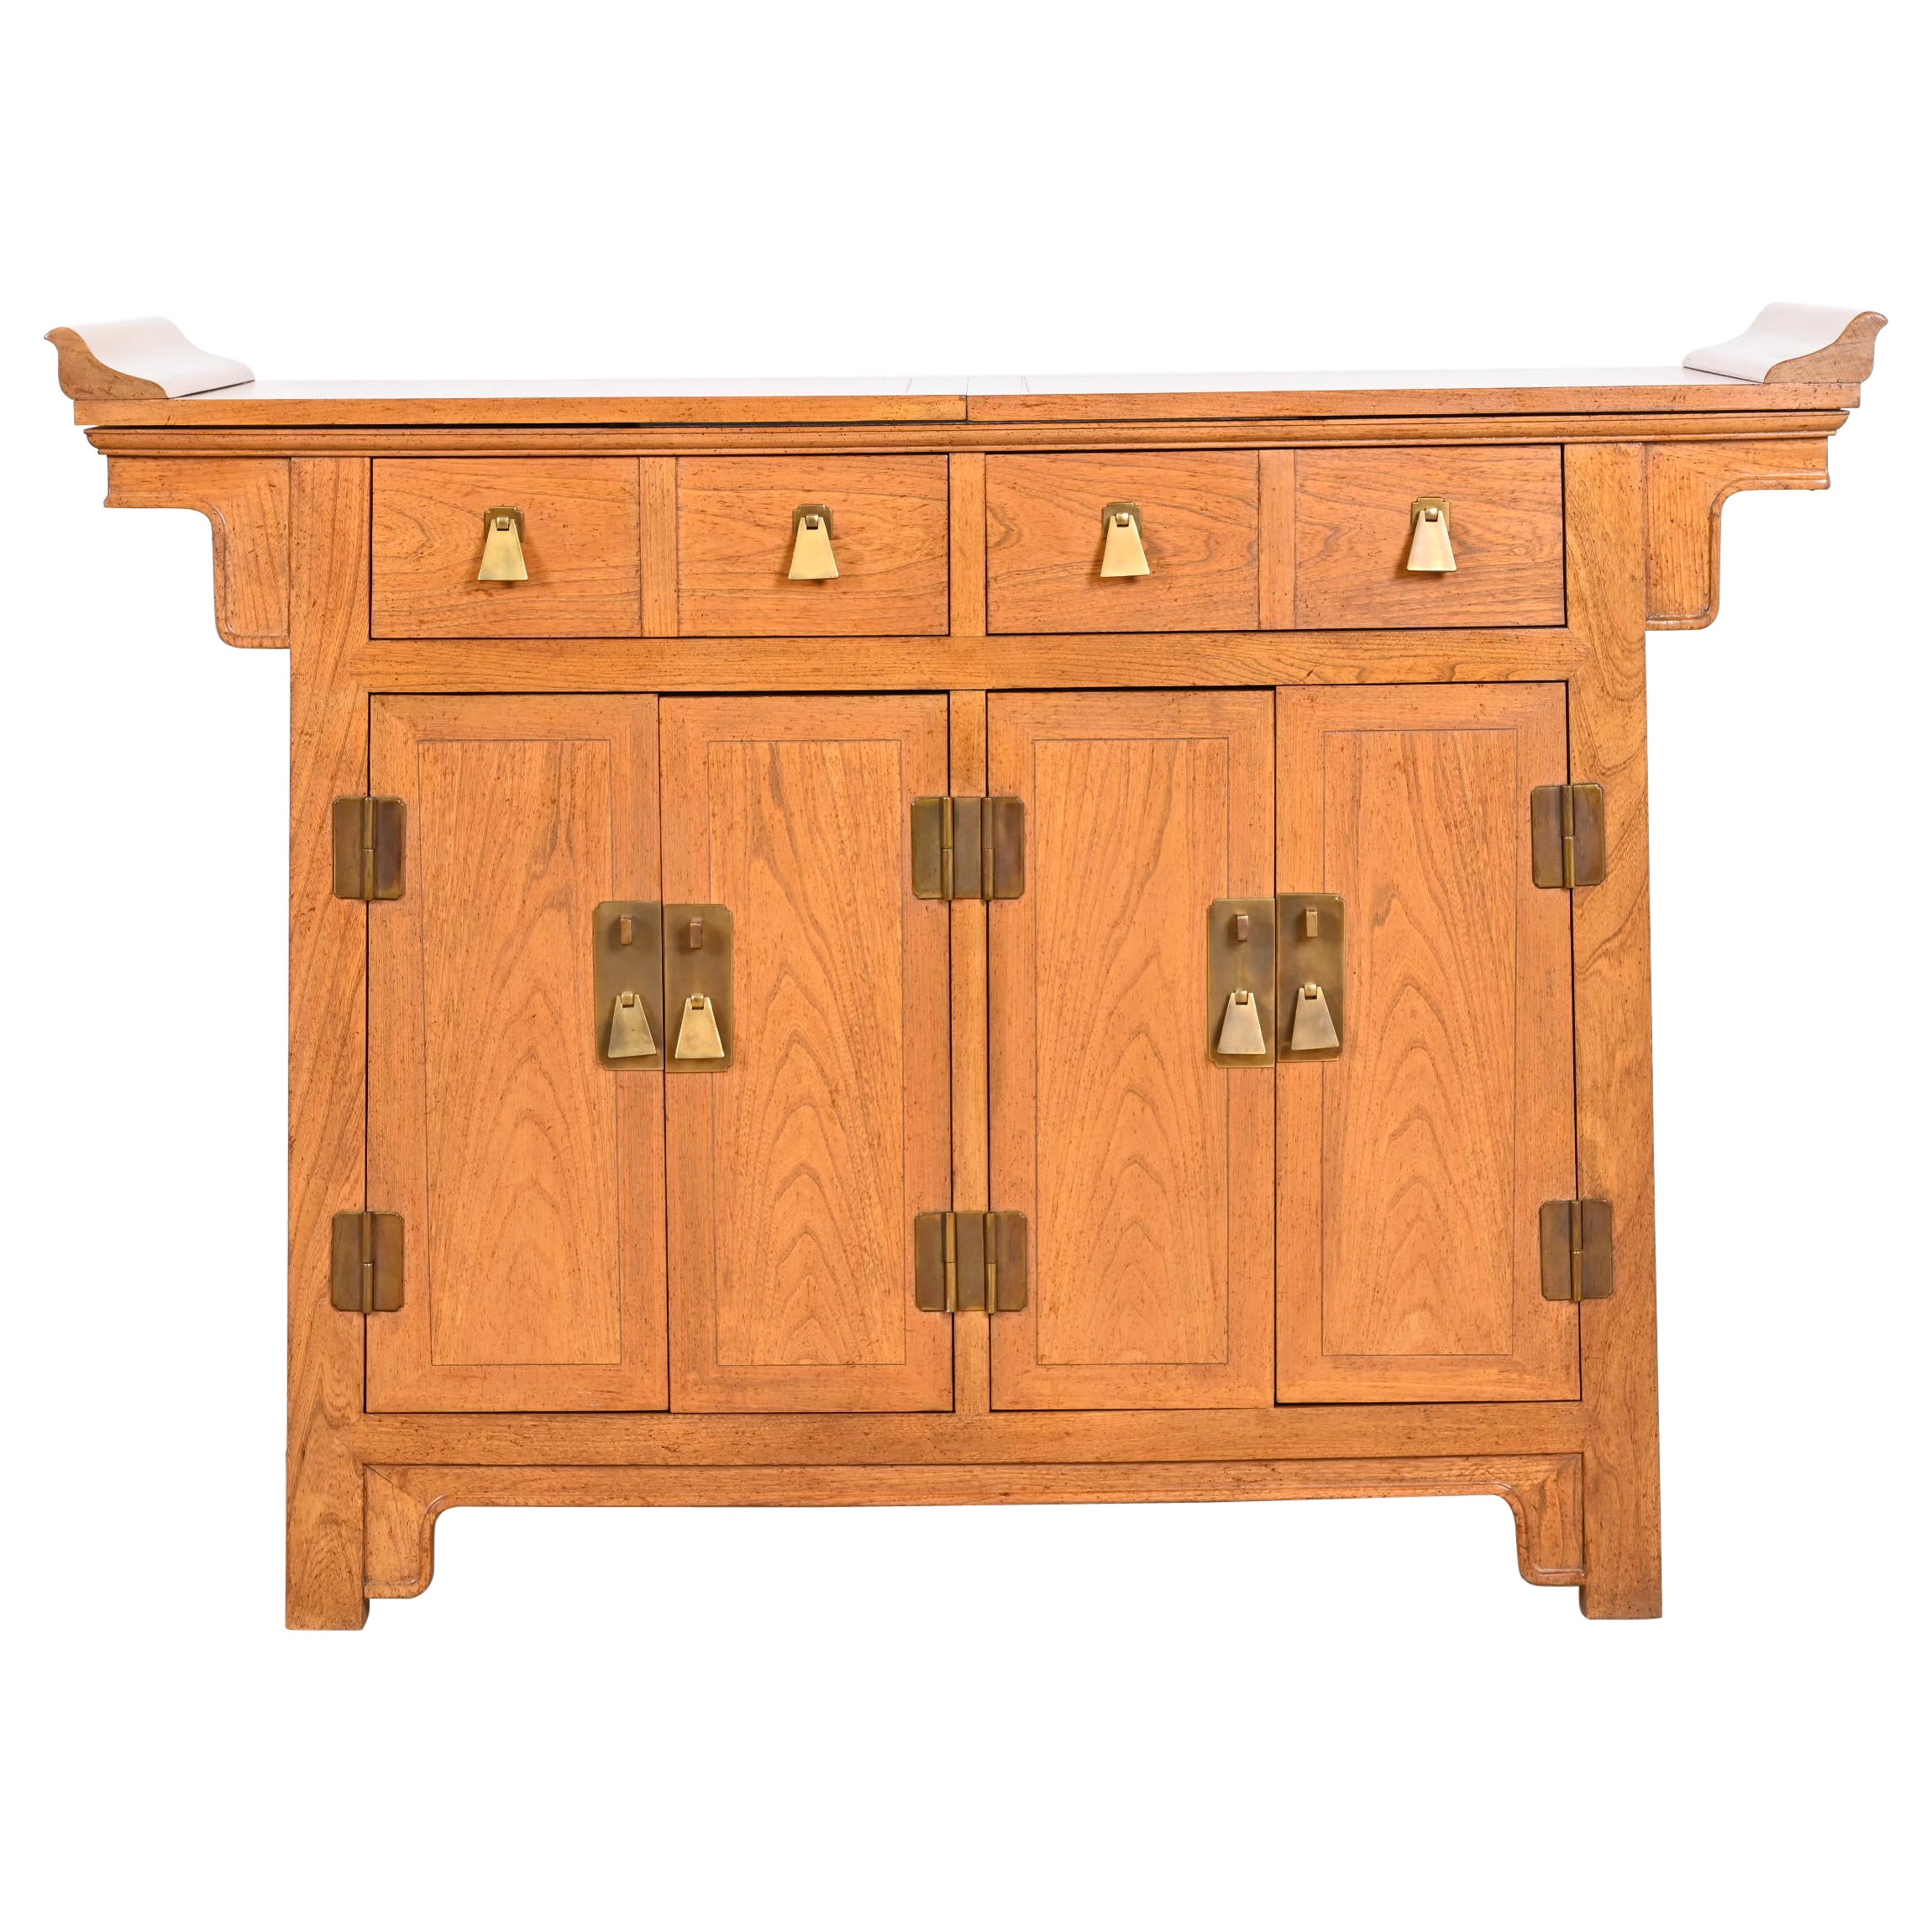 Michael Taylor for Baker Furniture Chinoiserie Elm Wood Sideboard or Bar Cabinet